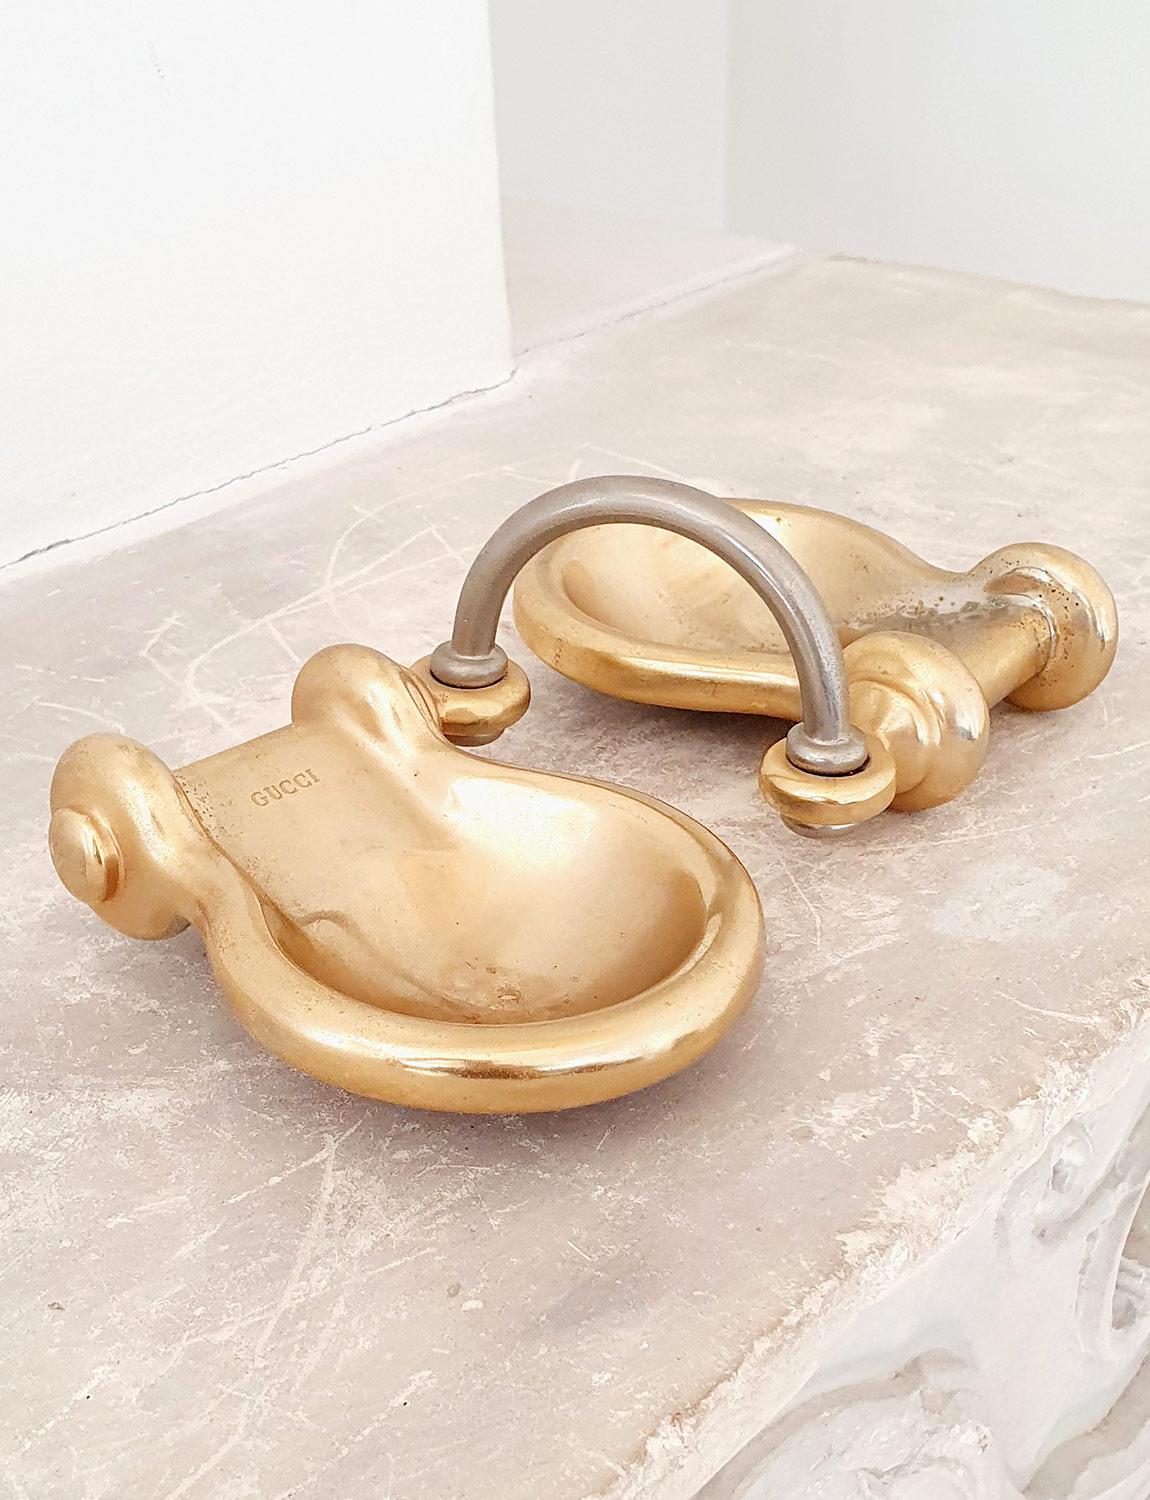 This pair of conjoined heavy brass bowls or ashtrays were made by Gucci in Italy in the 1970s. They can be used either for aperitivo or on a desk or dressing table to hold small objects. The pair is stamped Gucci on each brass bowl and joined with a